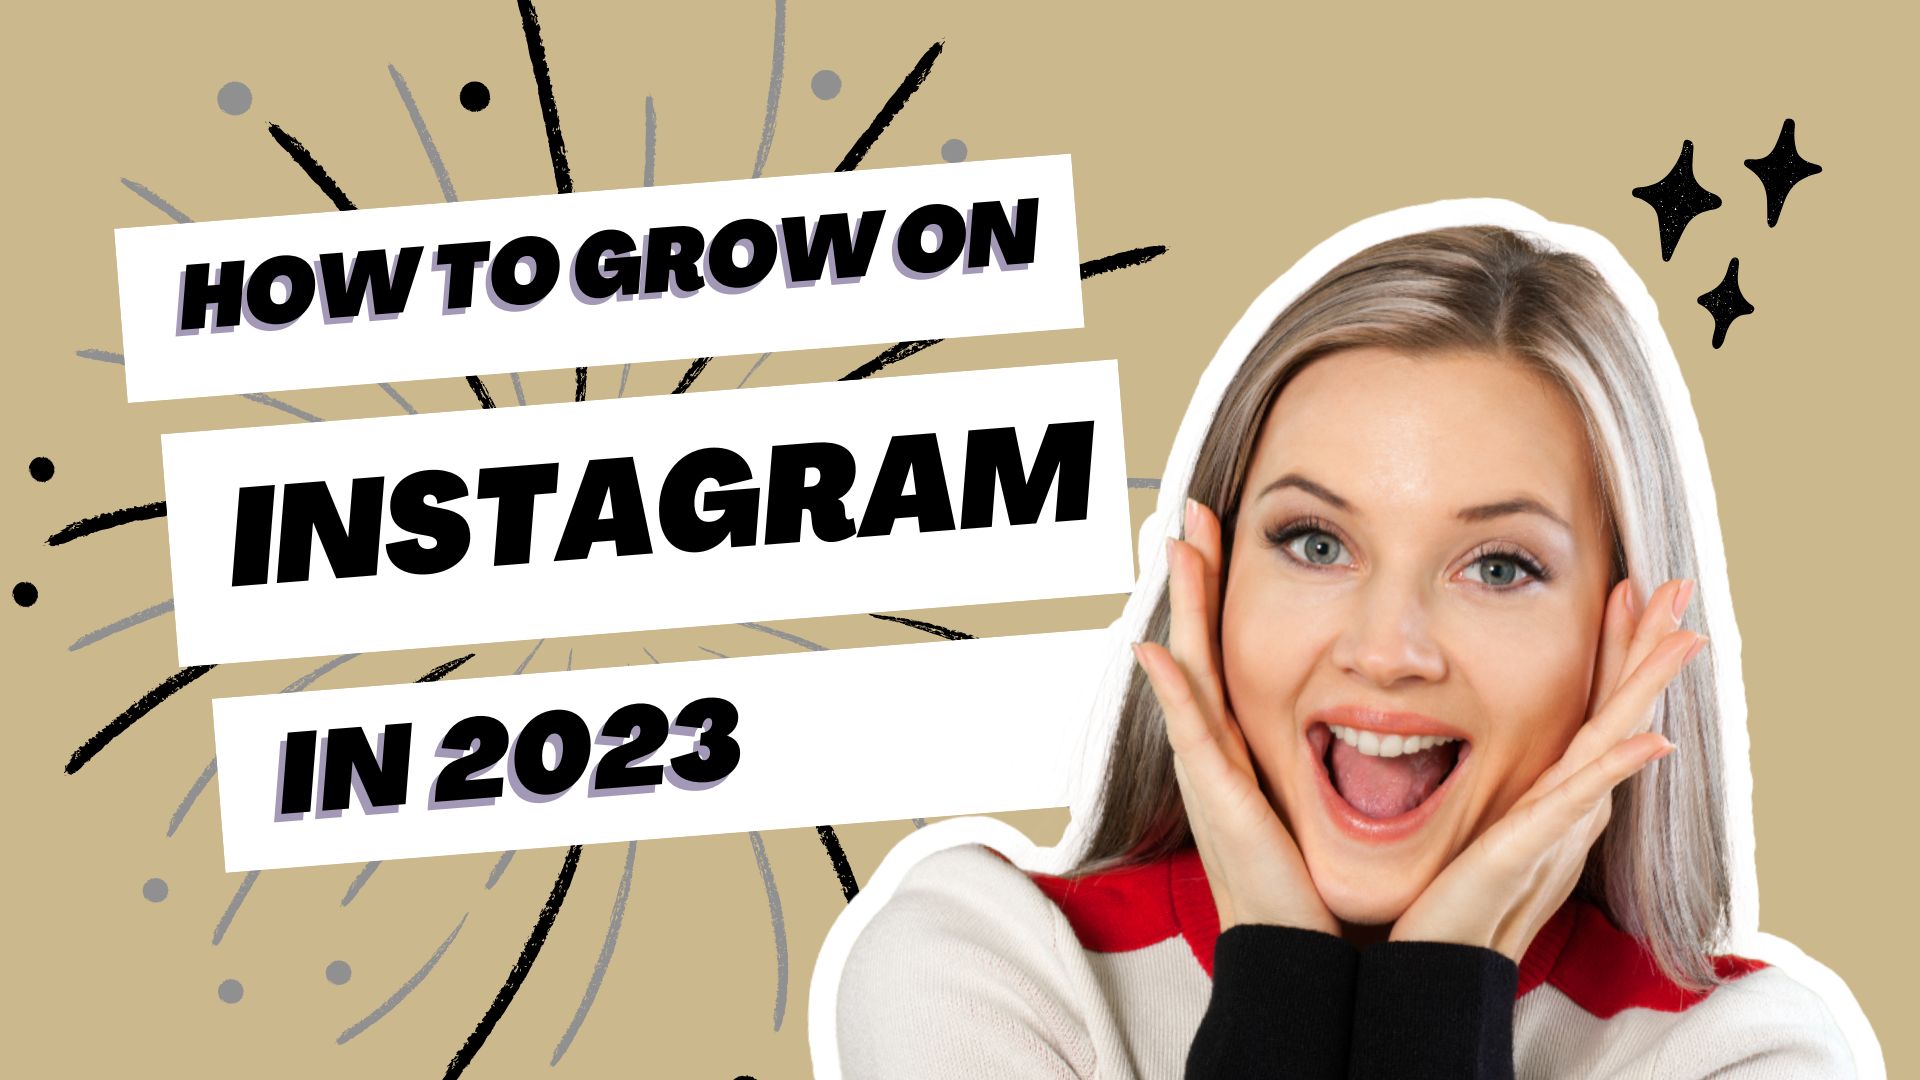 How To Grow Your Business On Instagram In 2023